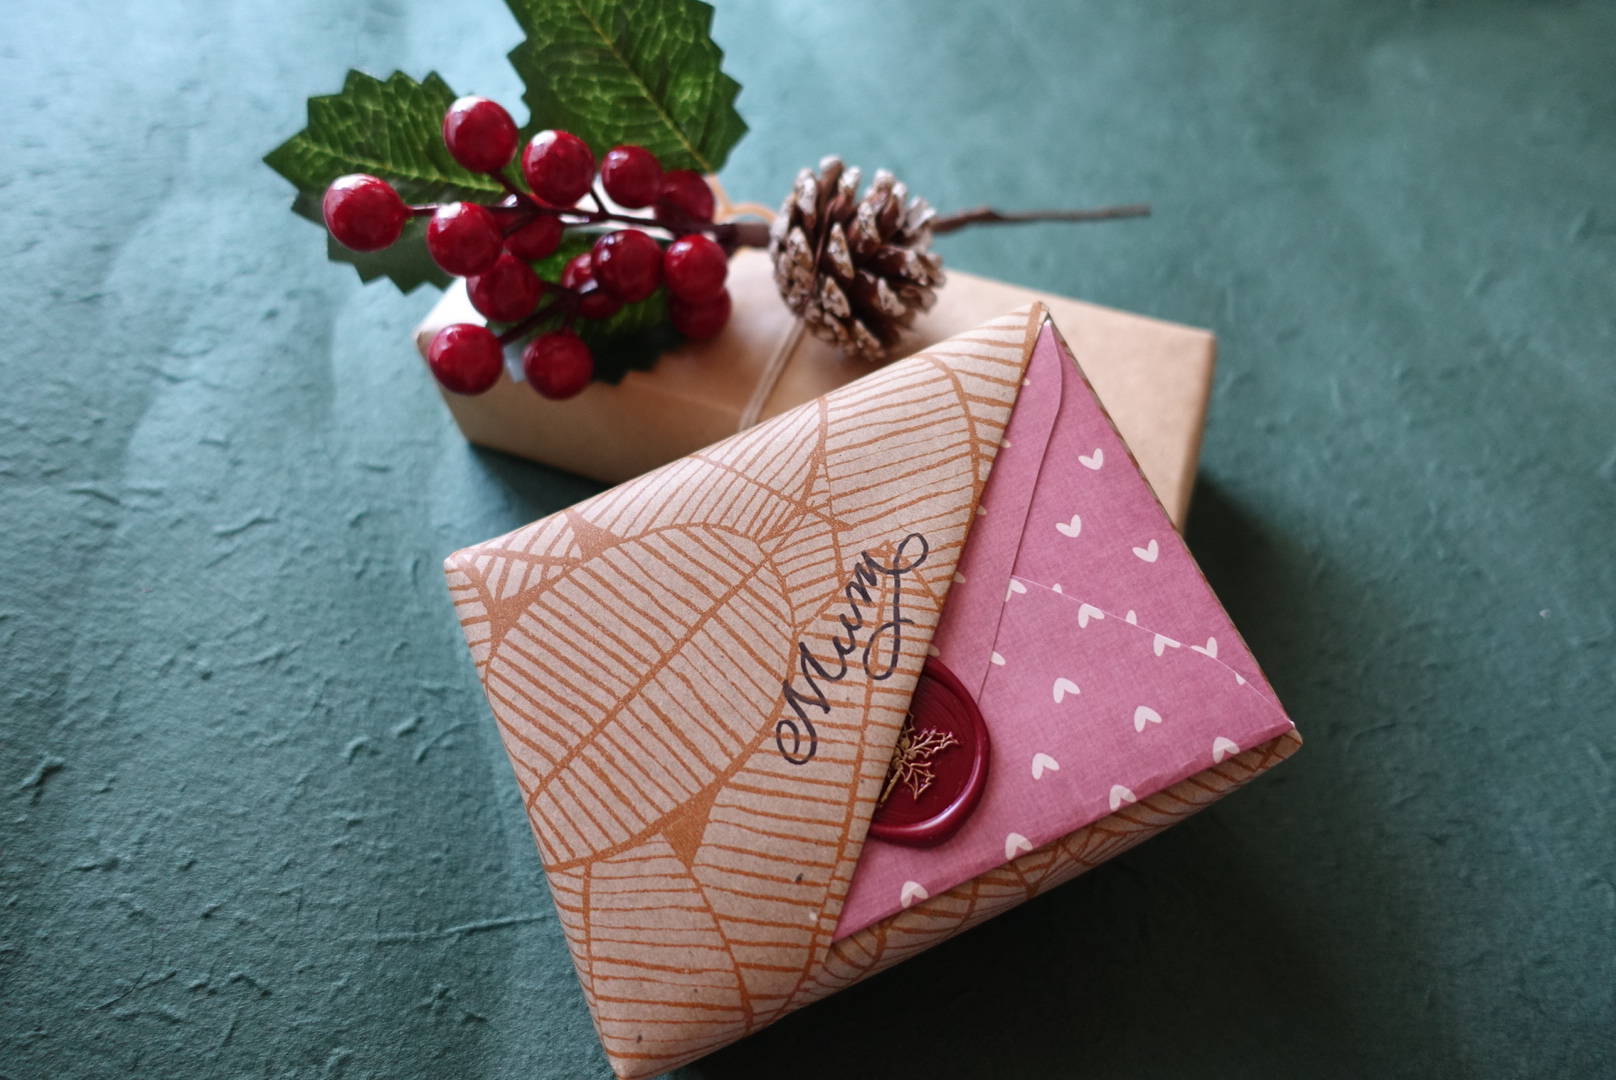 20 Gift Wrapping Ideas to Fit Any Present